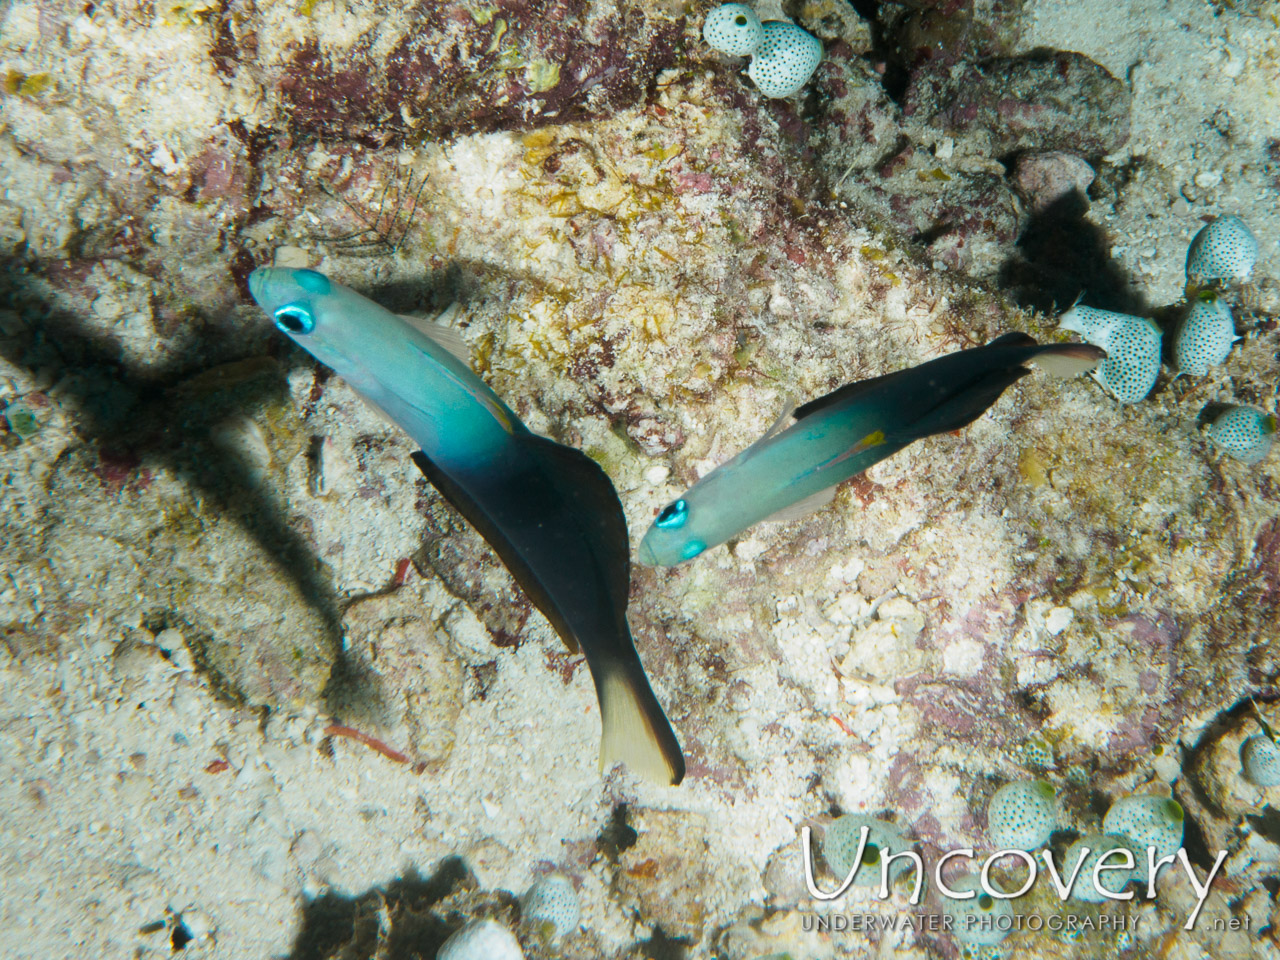 Twotone Dartfish, photo taken in Maldives, Male Atoll, South Male Atoll, Vadhoo Caves